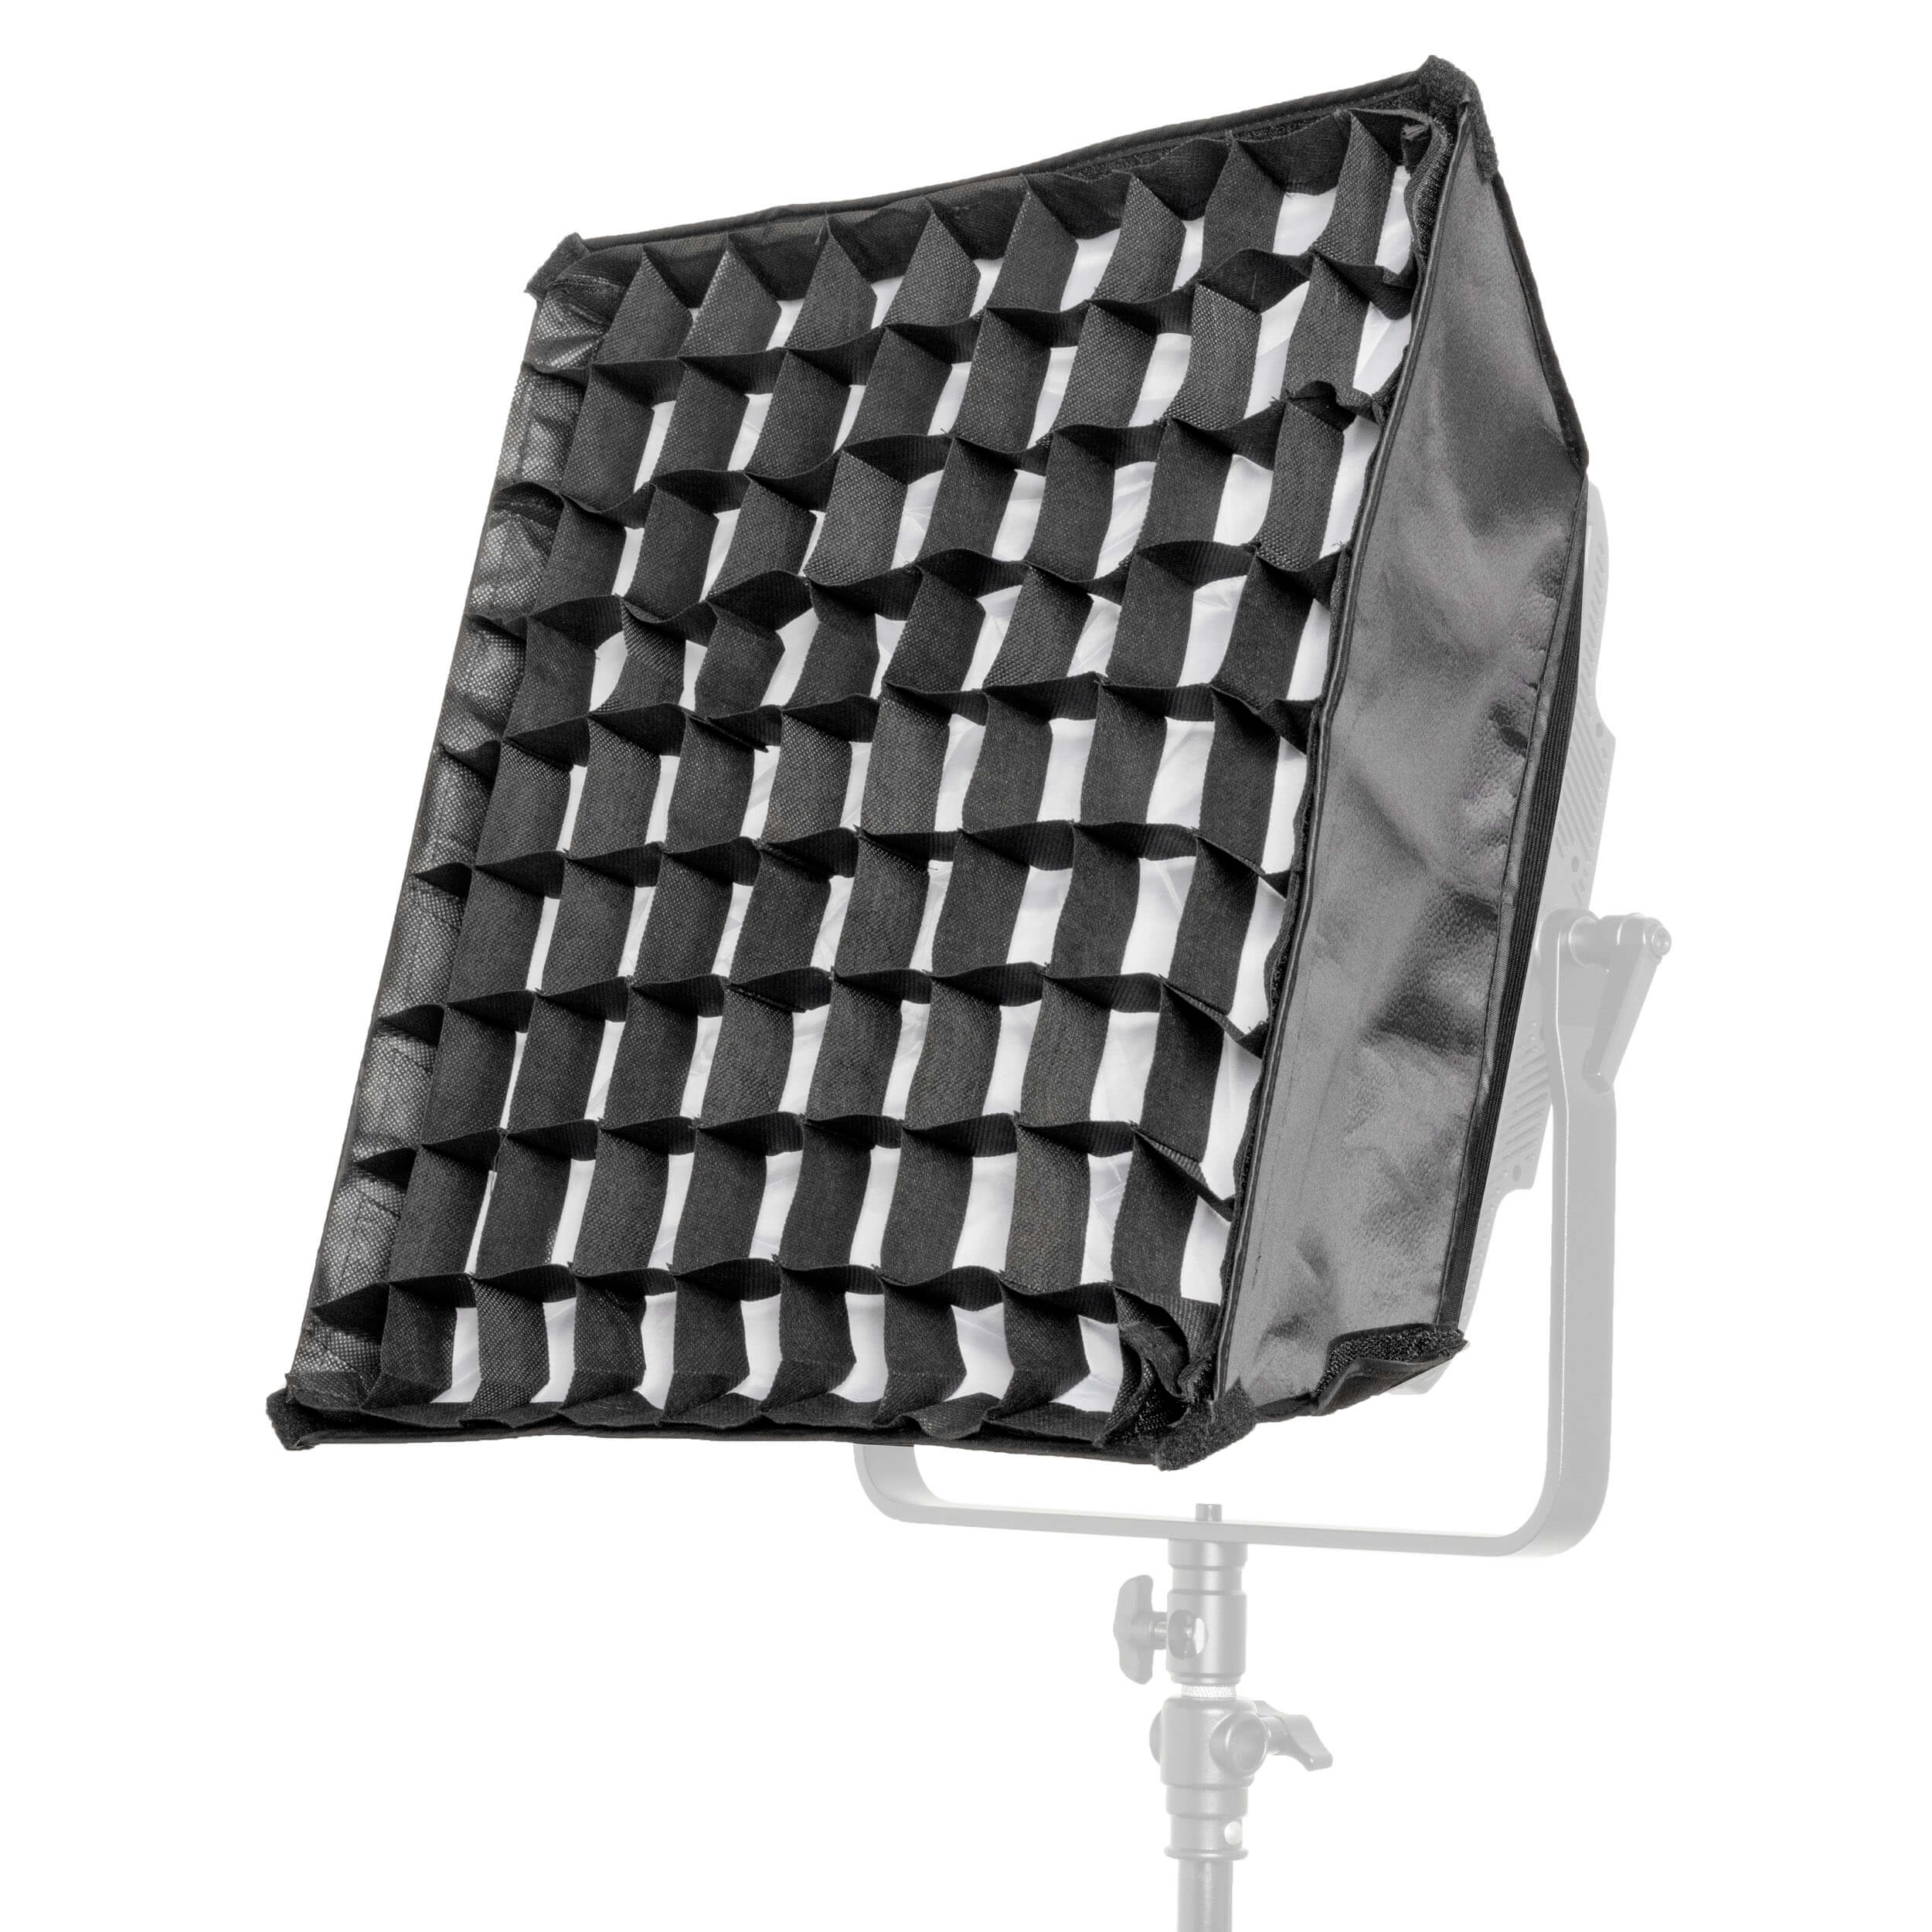 Honeycomb Grid for LECO1000 Series LED Video Lights